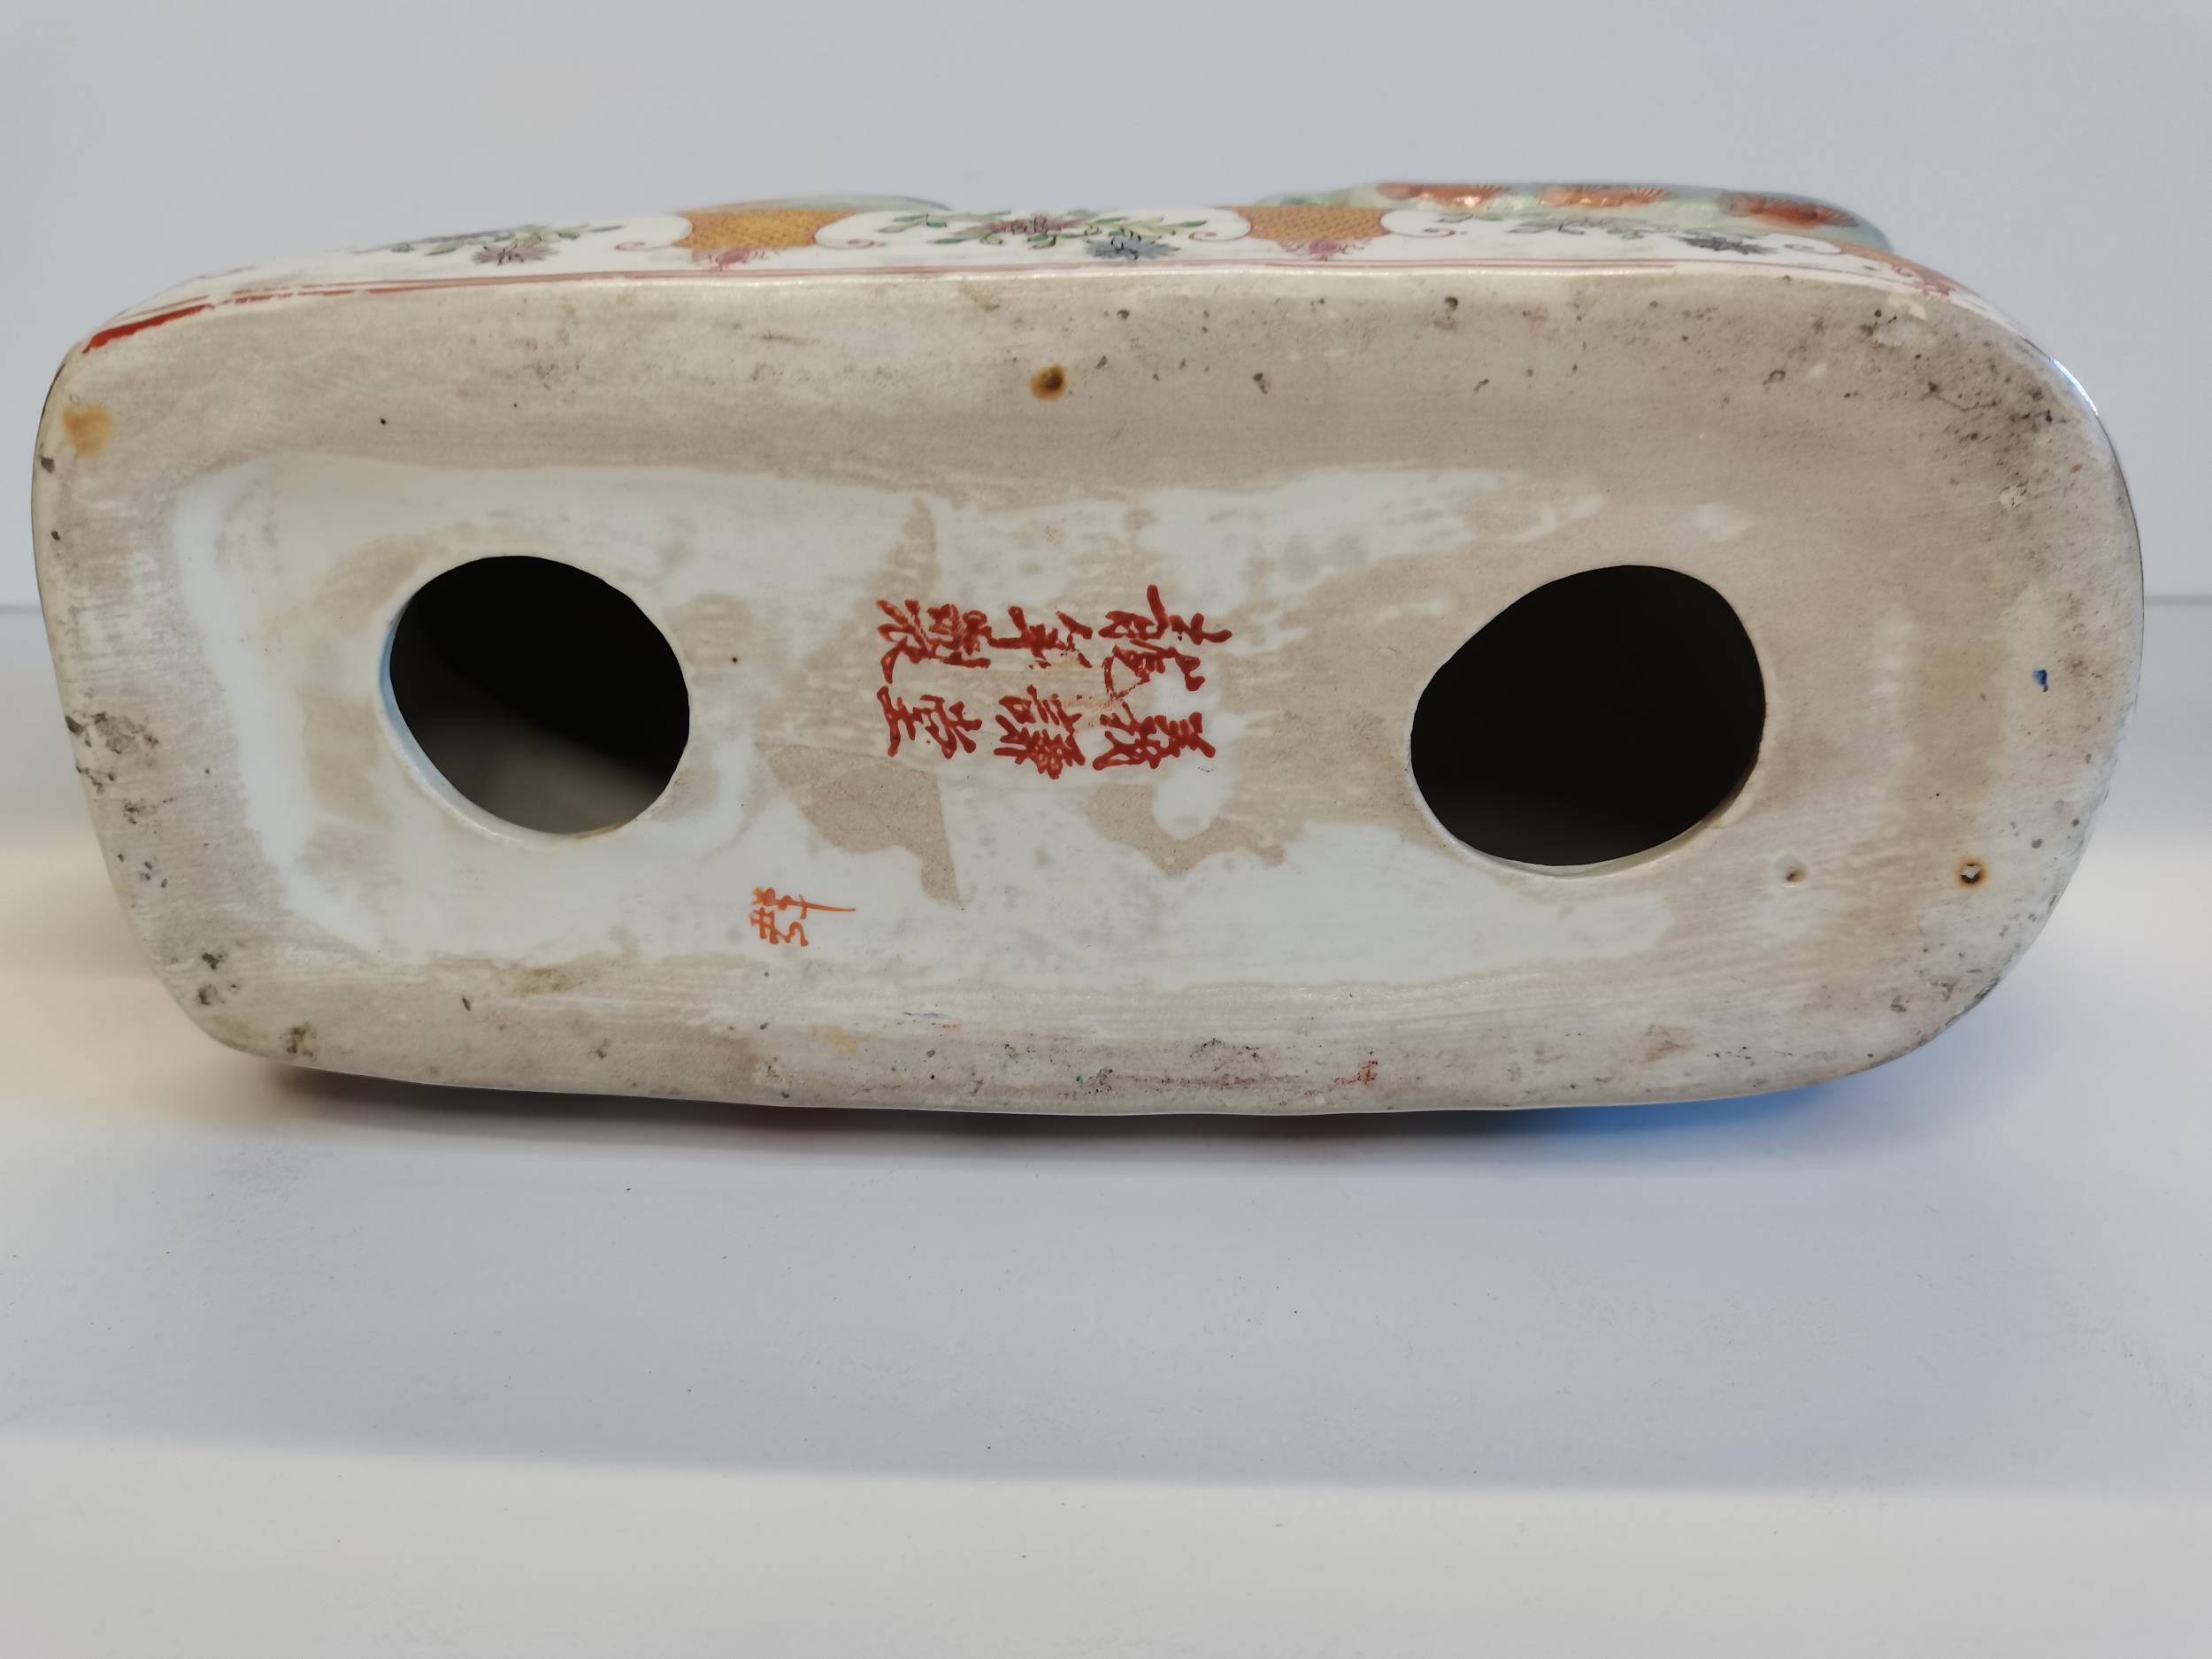 Porcelain Cat Pillow Form Imari (Japanese) with character marks on base - Image 3 of 3